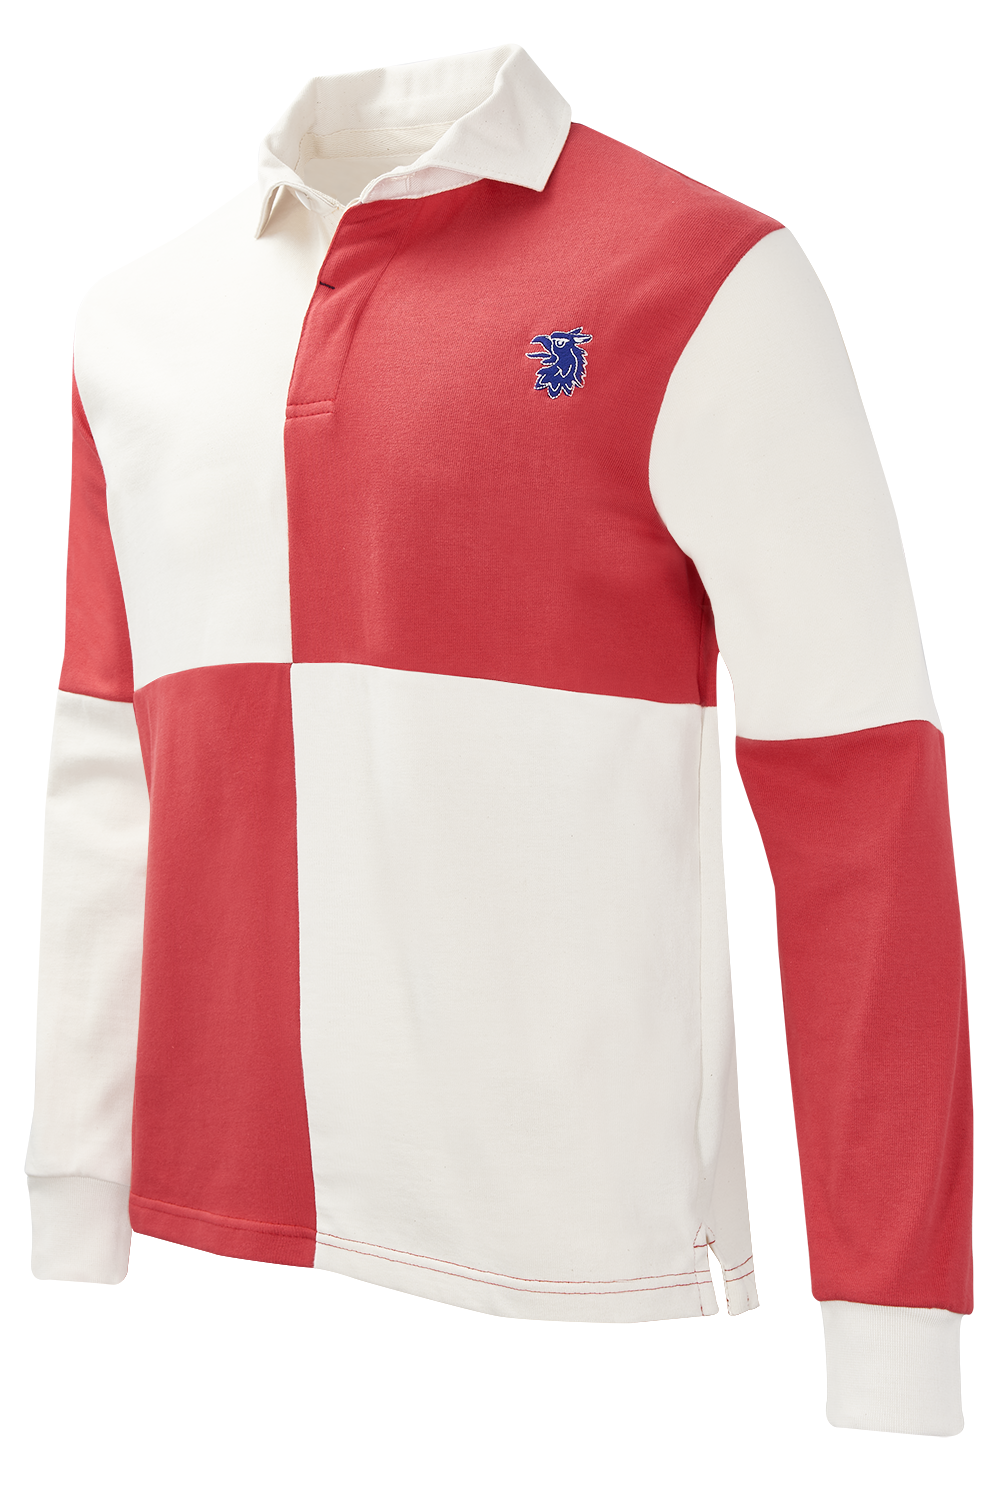 krom merk mijn Vintage Rugby Shirts - Shop - The Rugby Company